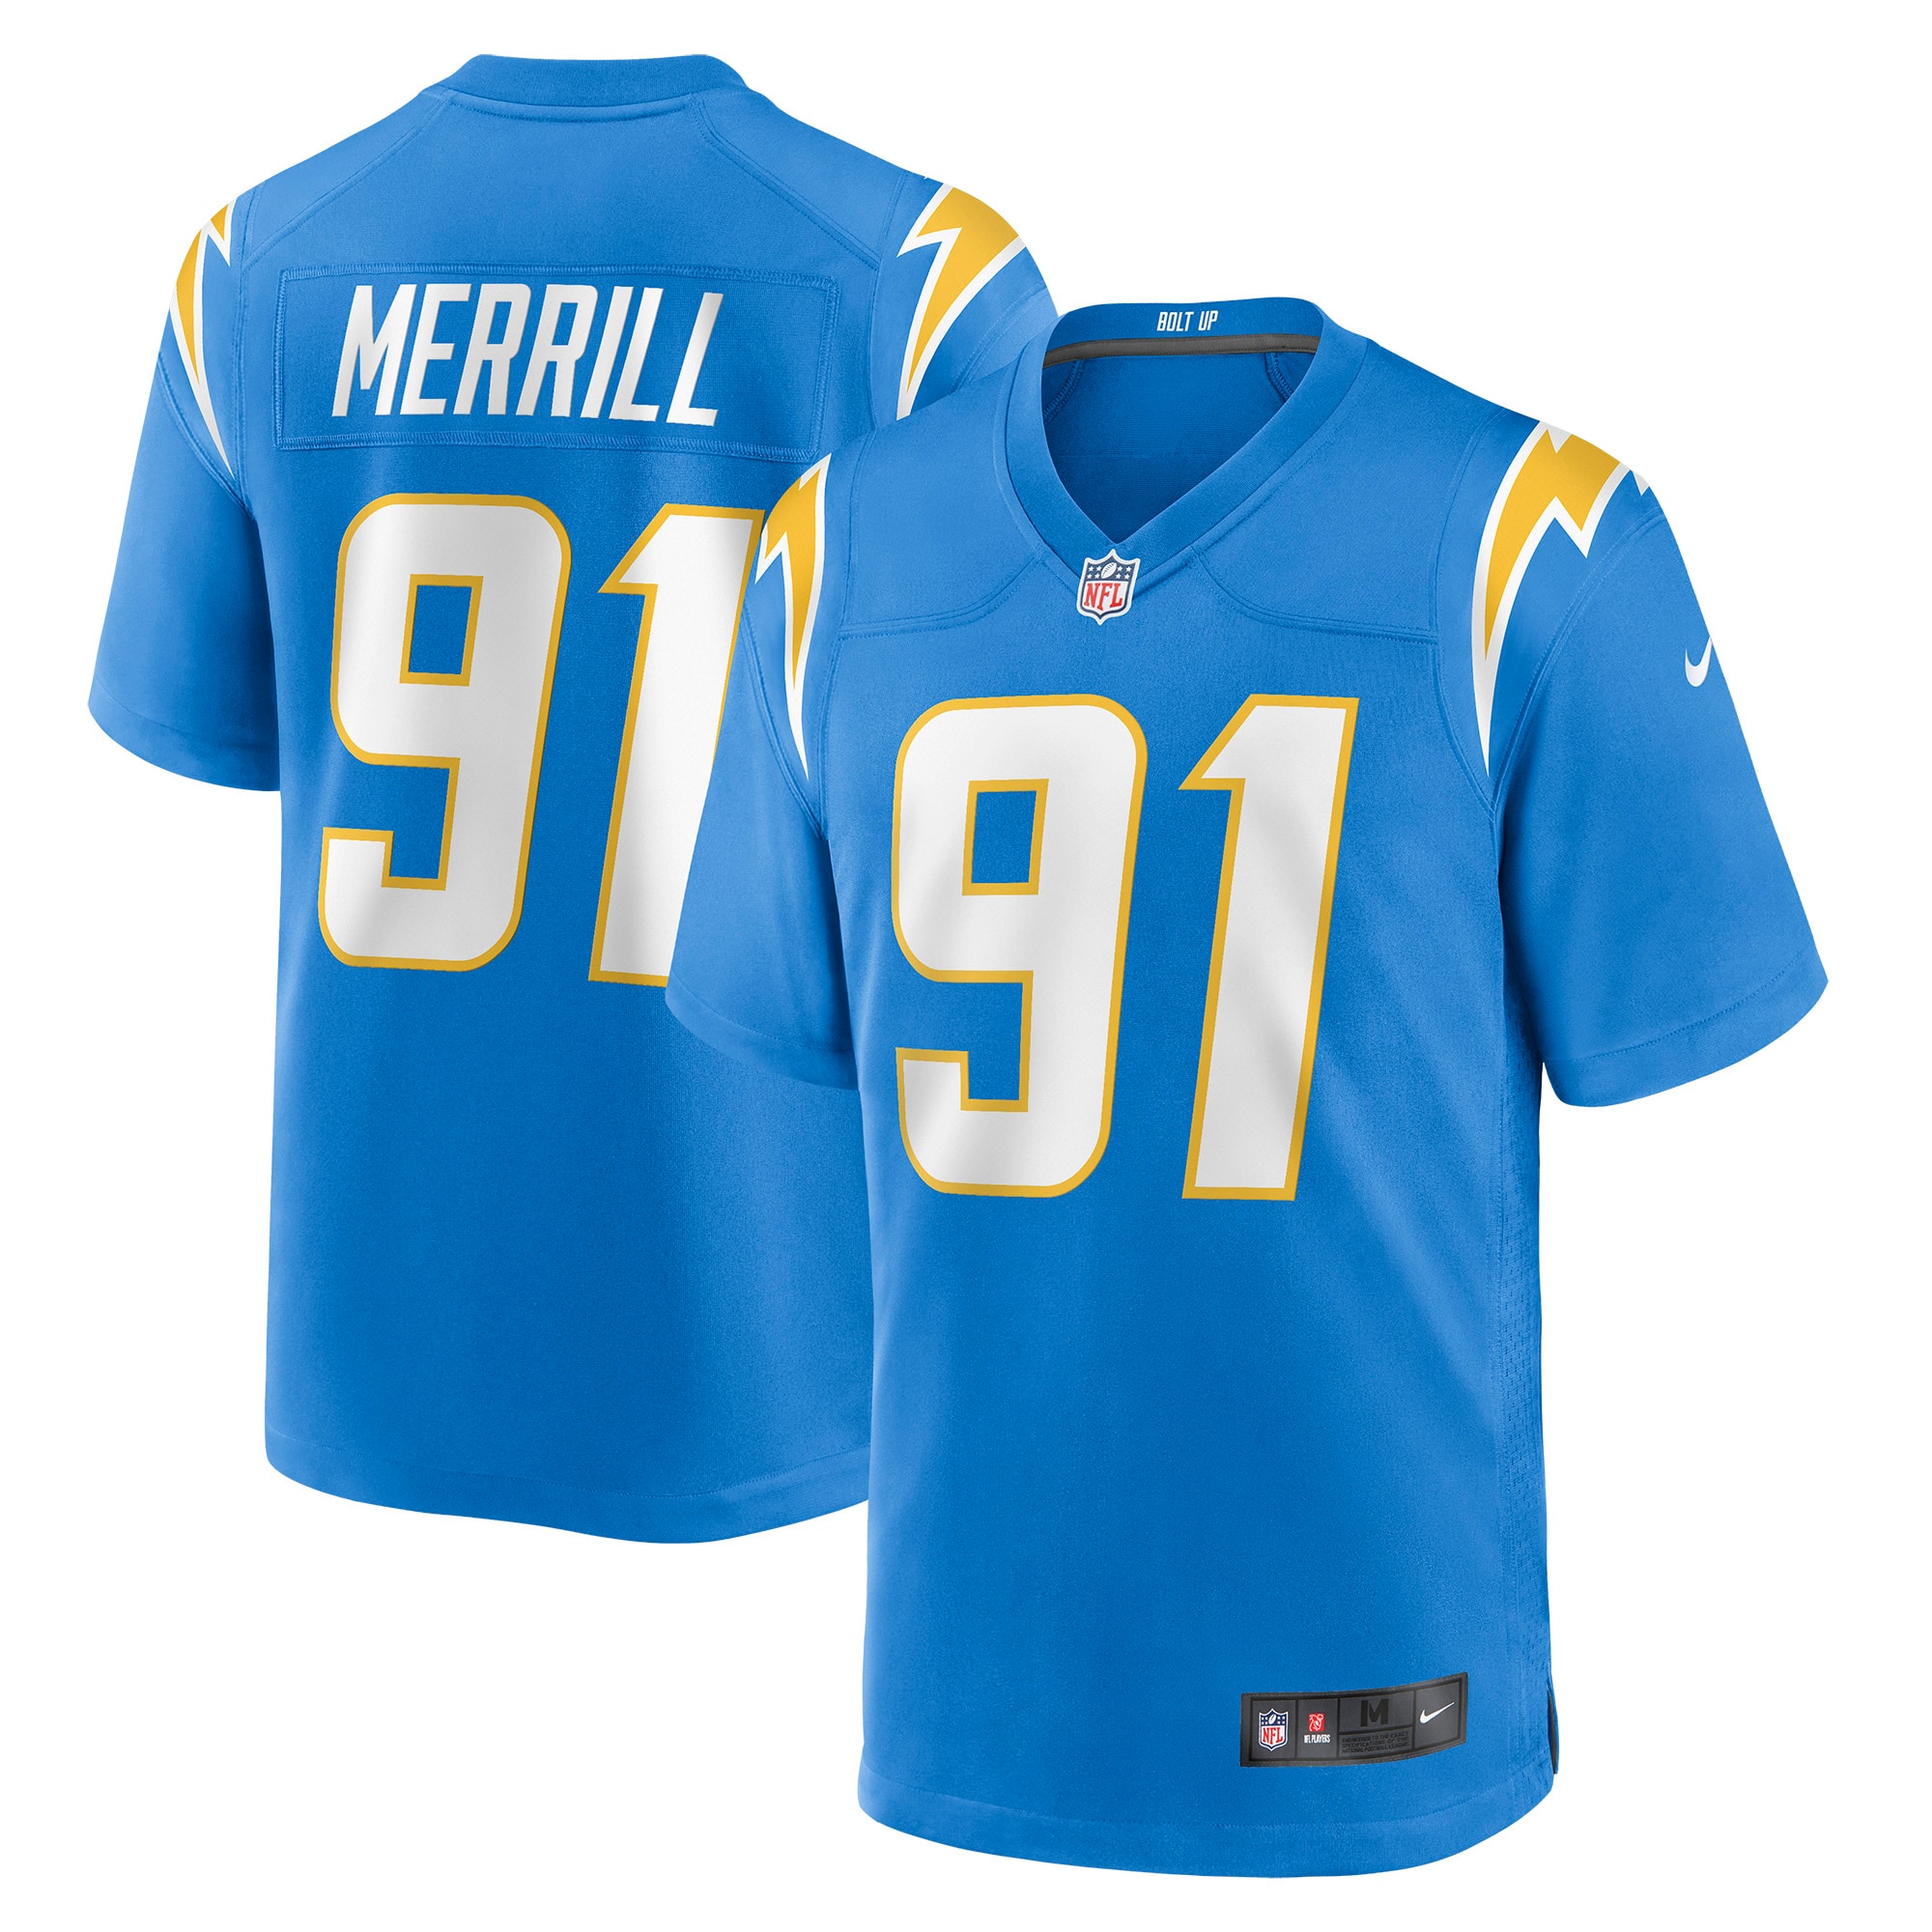 Men's Los Angeles Chargers Jerseys Powder Blue Forrest Merrill Player Game Style